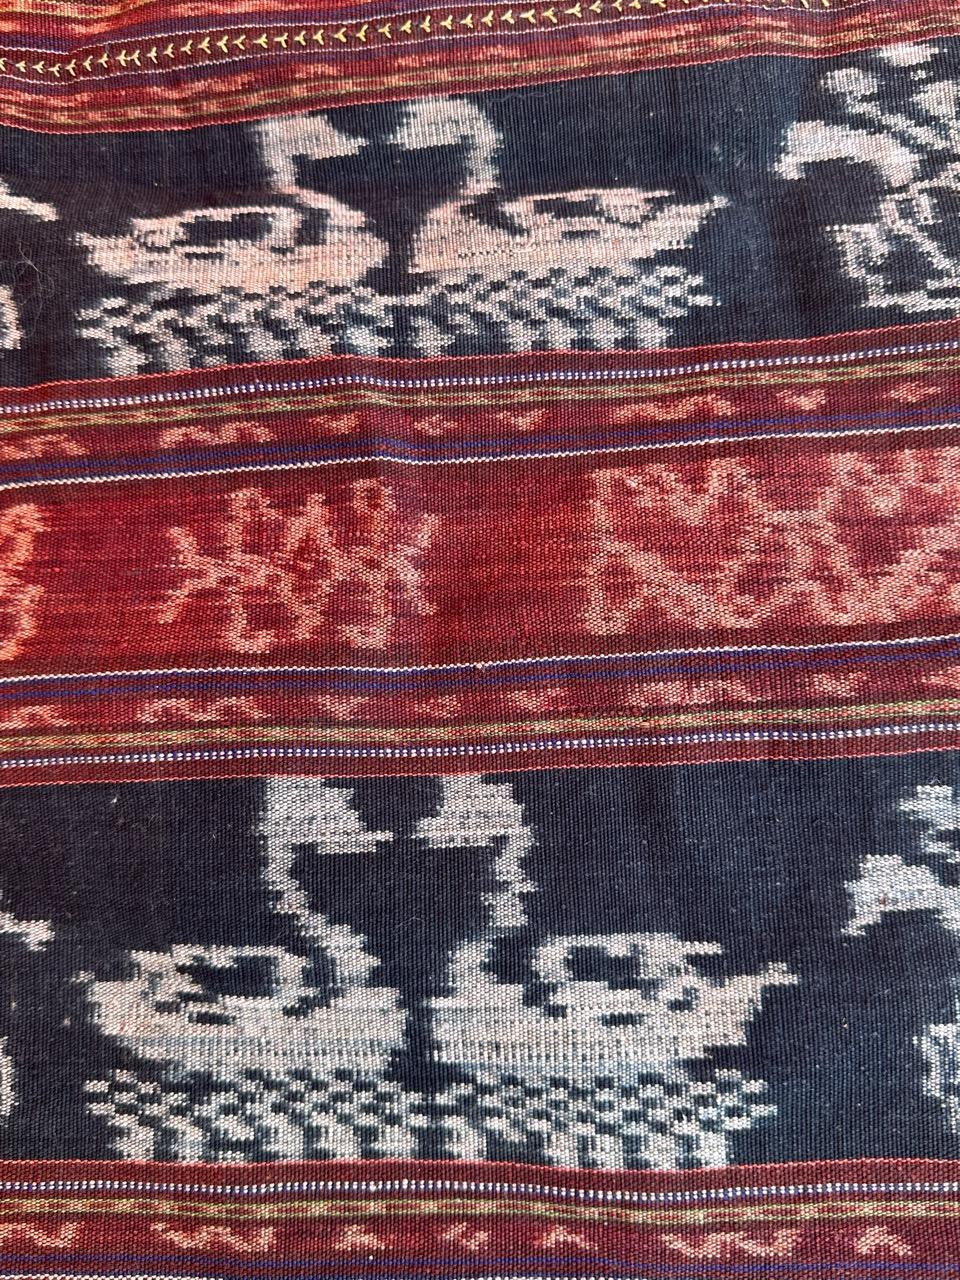 Bobyrug’s Vintage Indonesian Ikat Tapestry or Tablecloth In Good Condition For Sale In Saint Ouen, FR